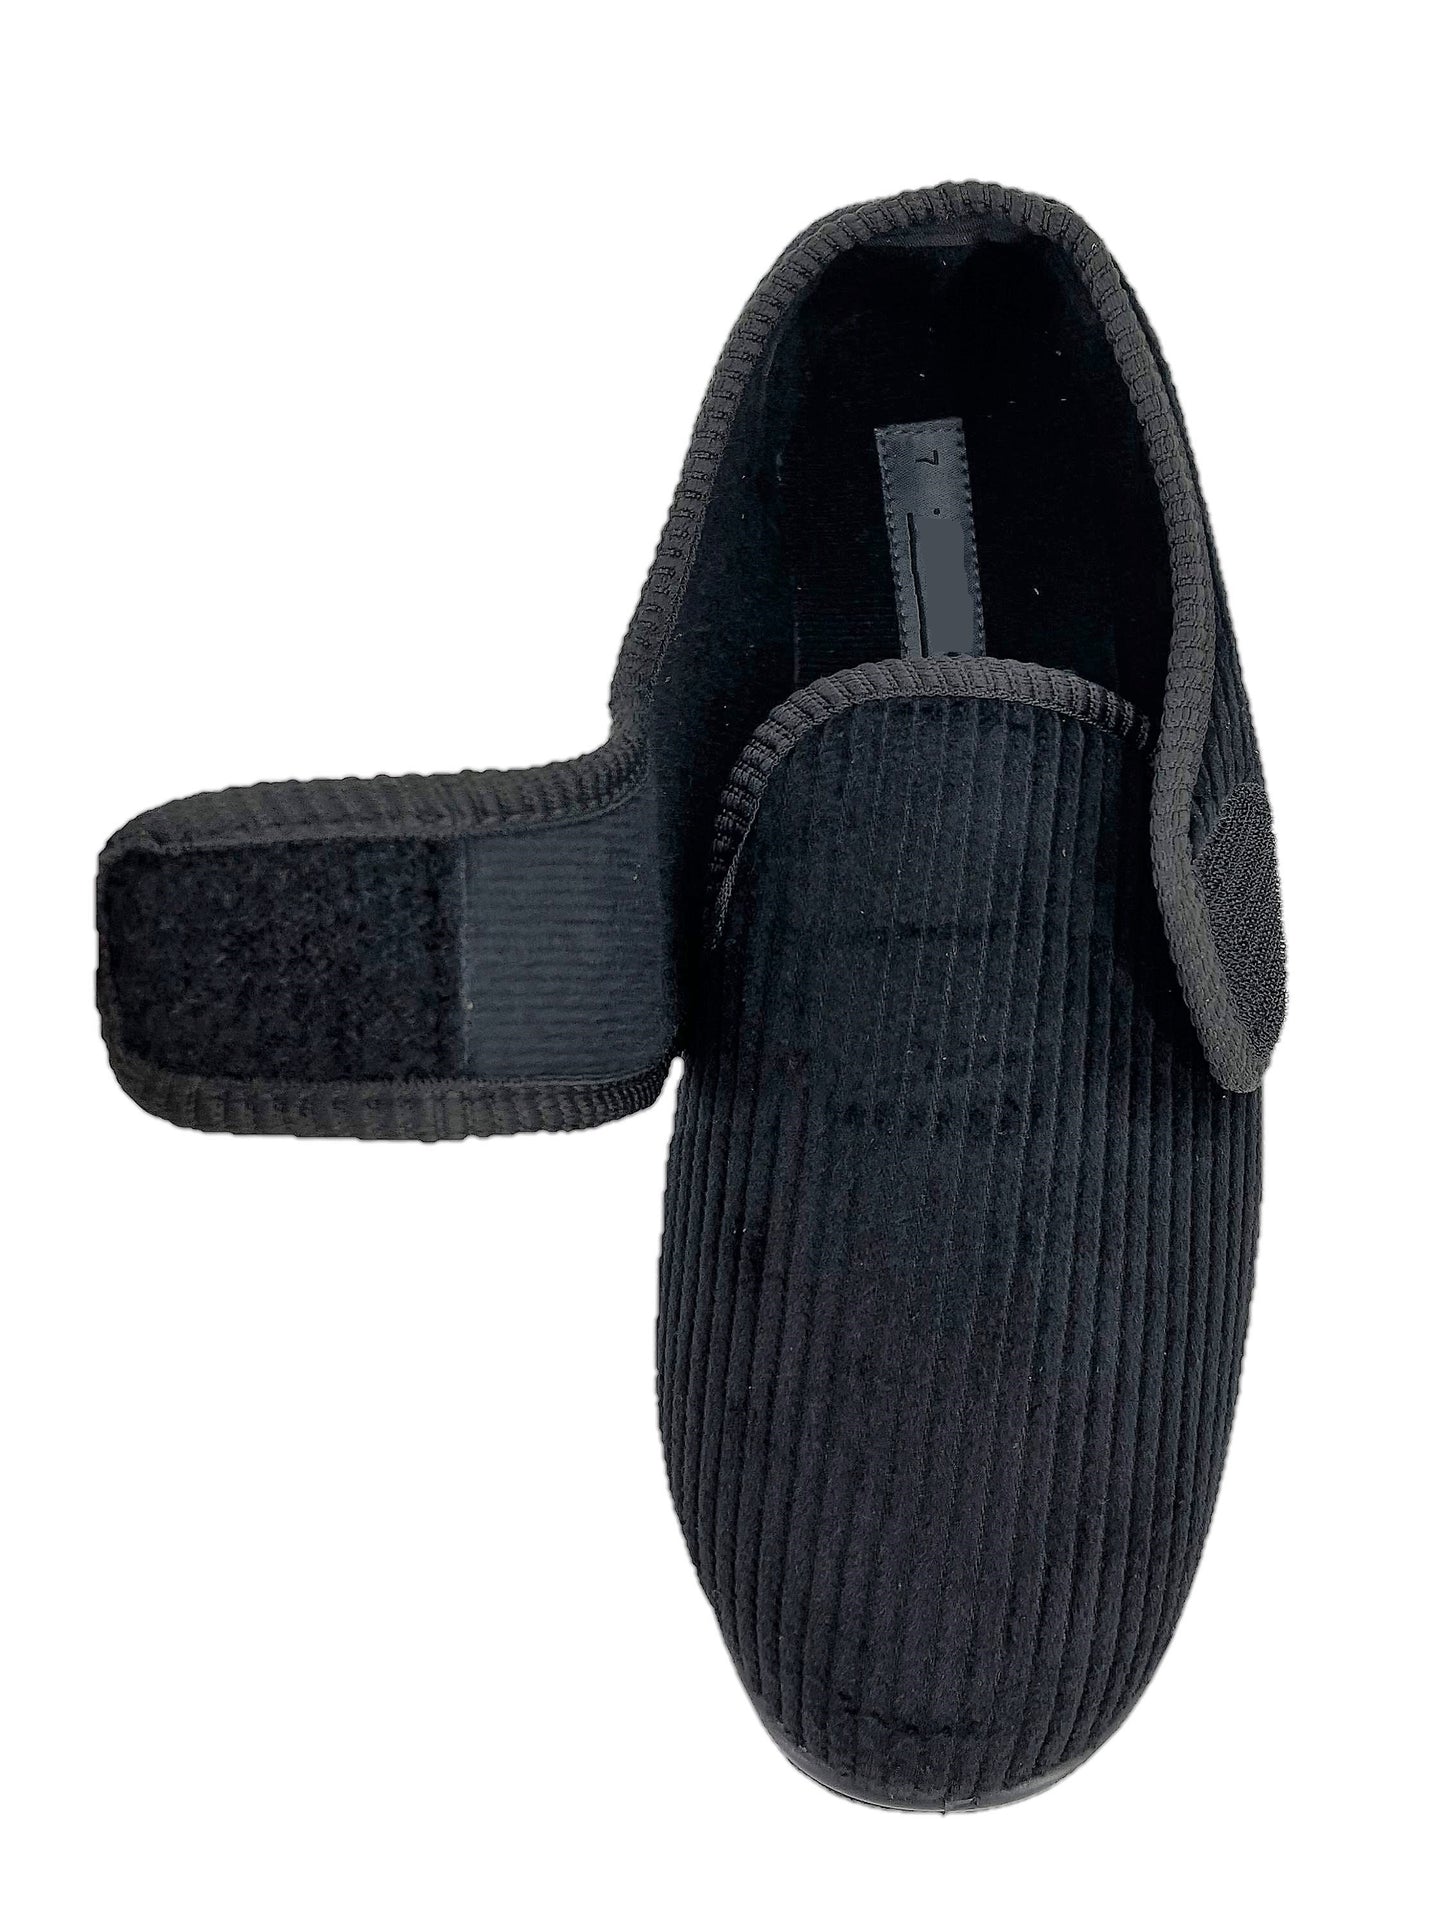 Men's Easy Access Black Corduroy Touch-and-Close Strap Slippers House Shoes